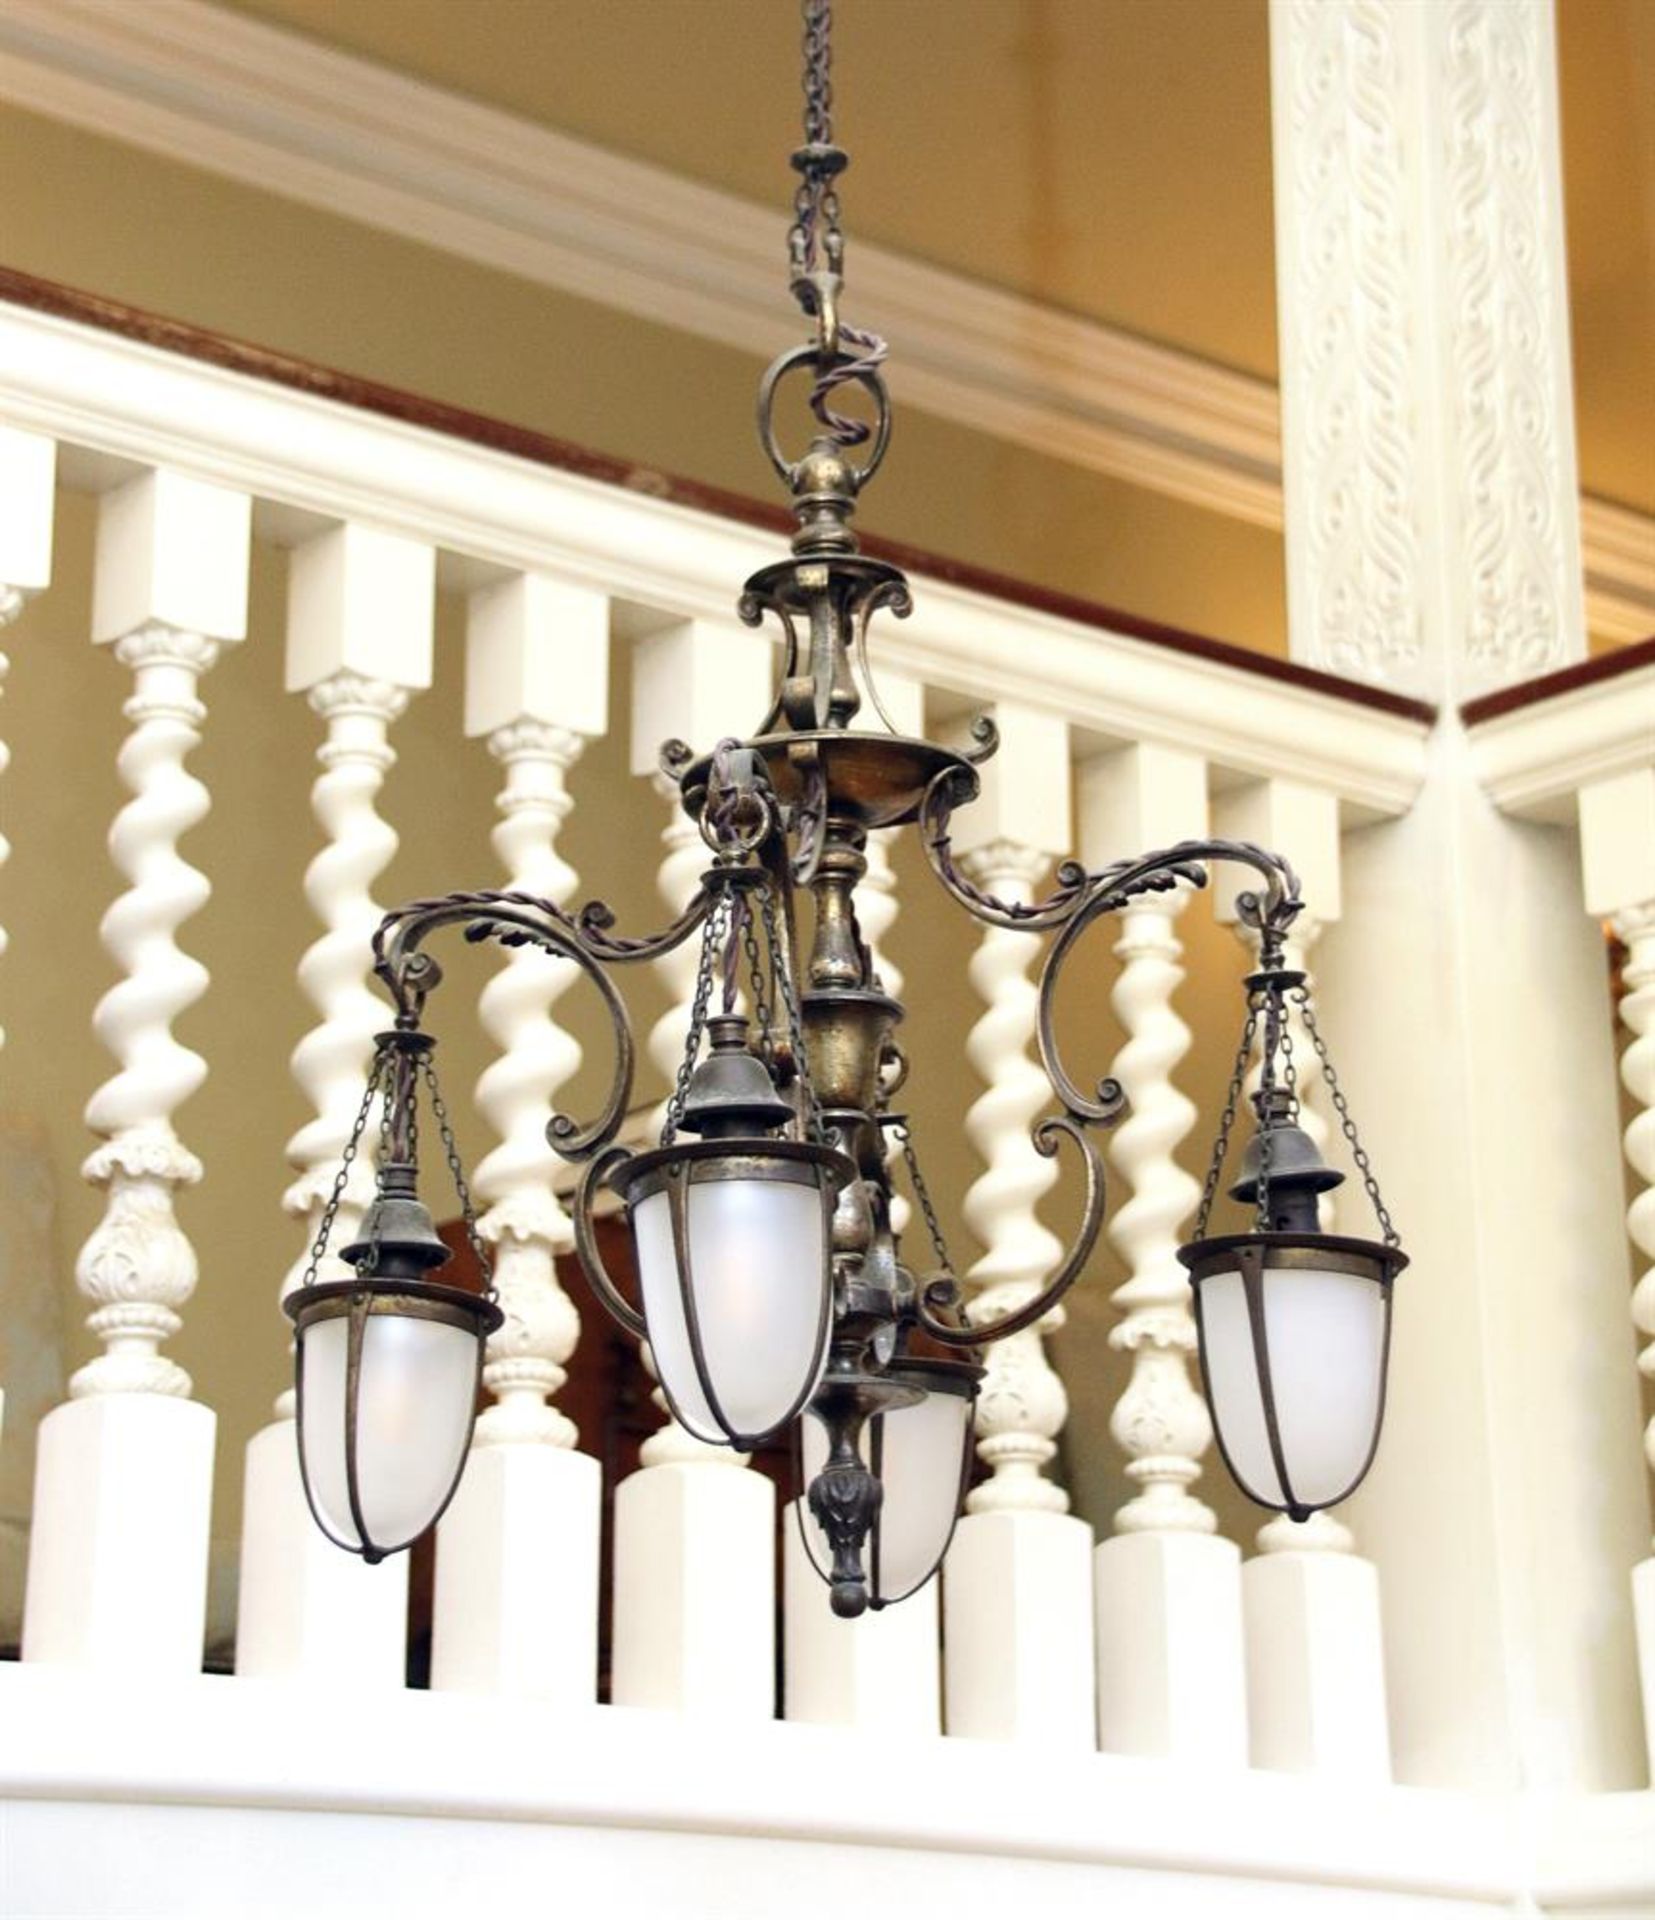 AN ARTS AND CRAFTS BRASS CHANDELIER